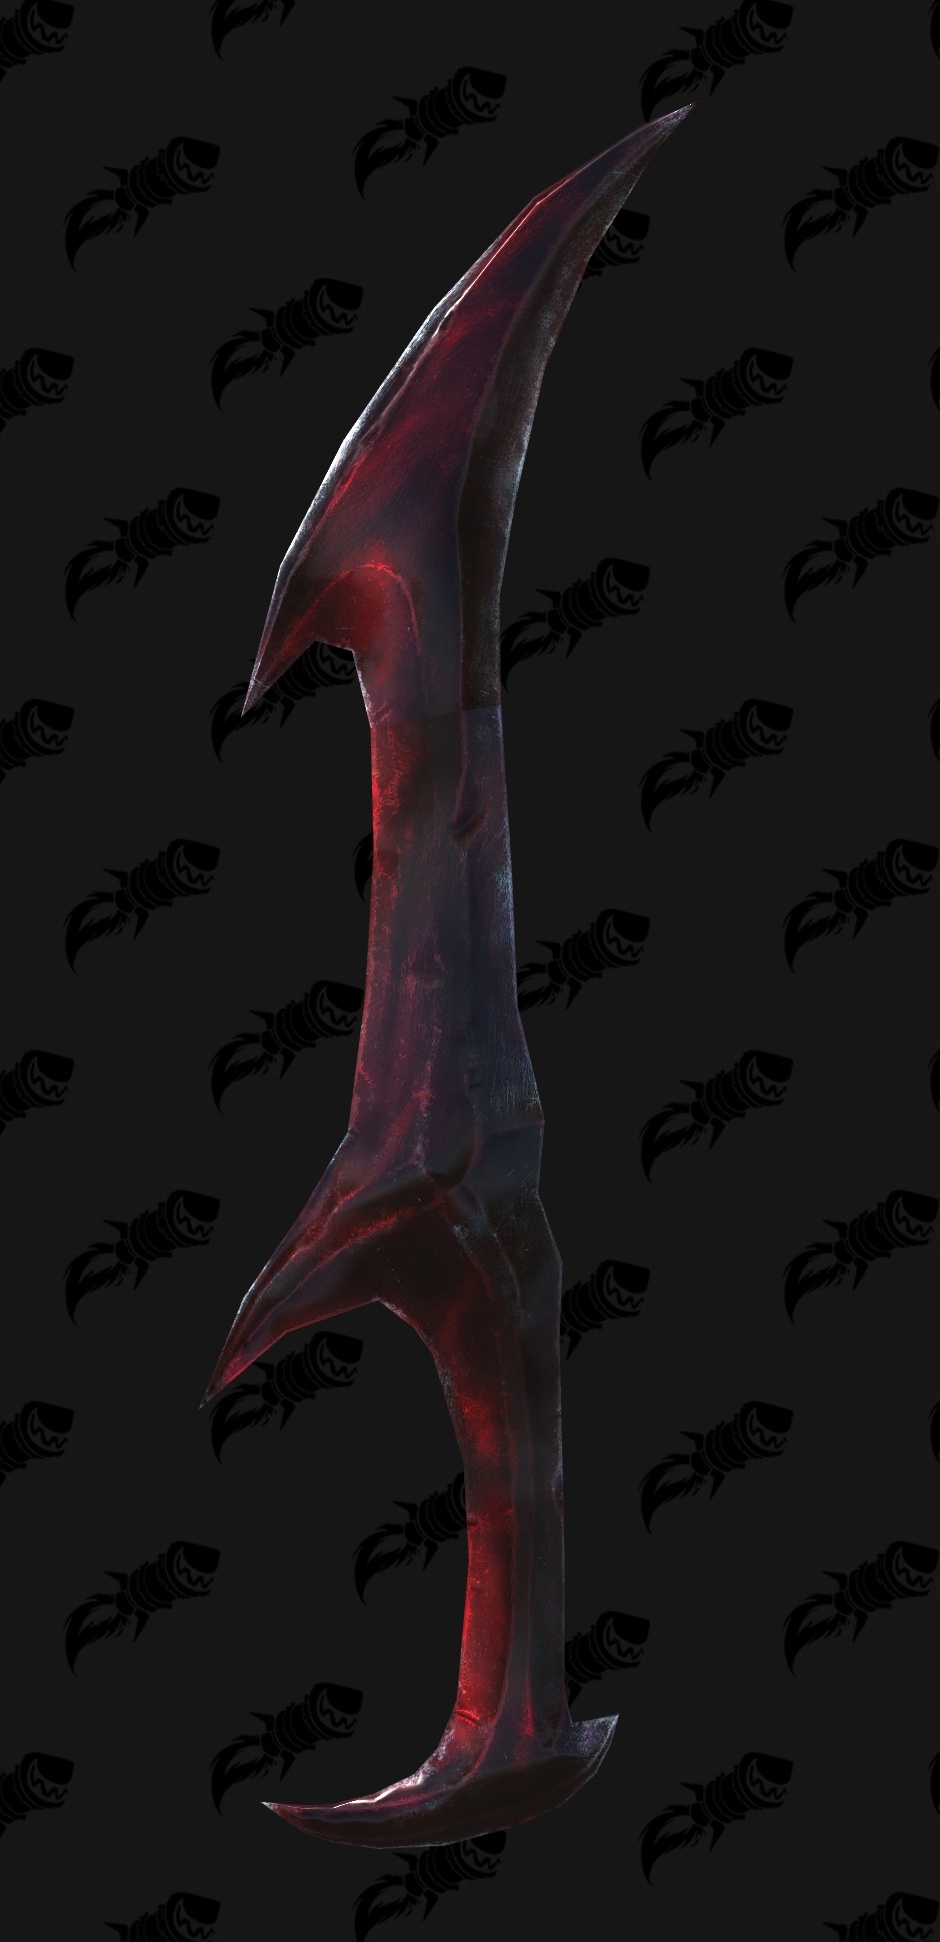 The Blood Knight Is Diablo's First New Class Since the Crusader in